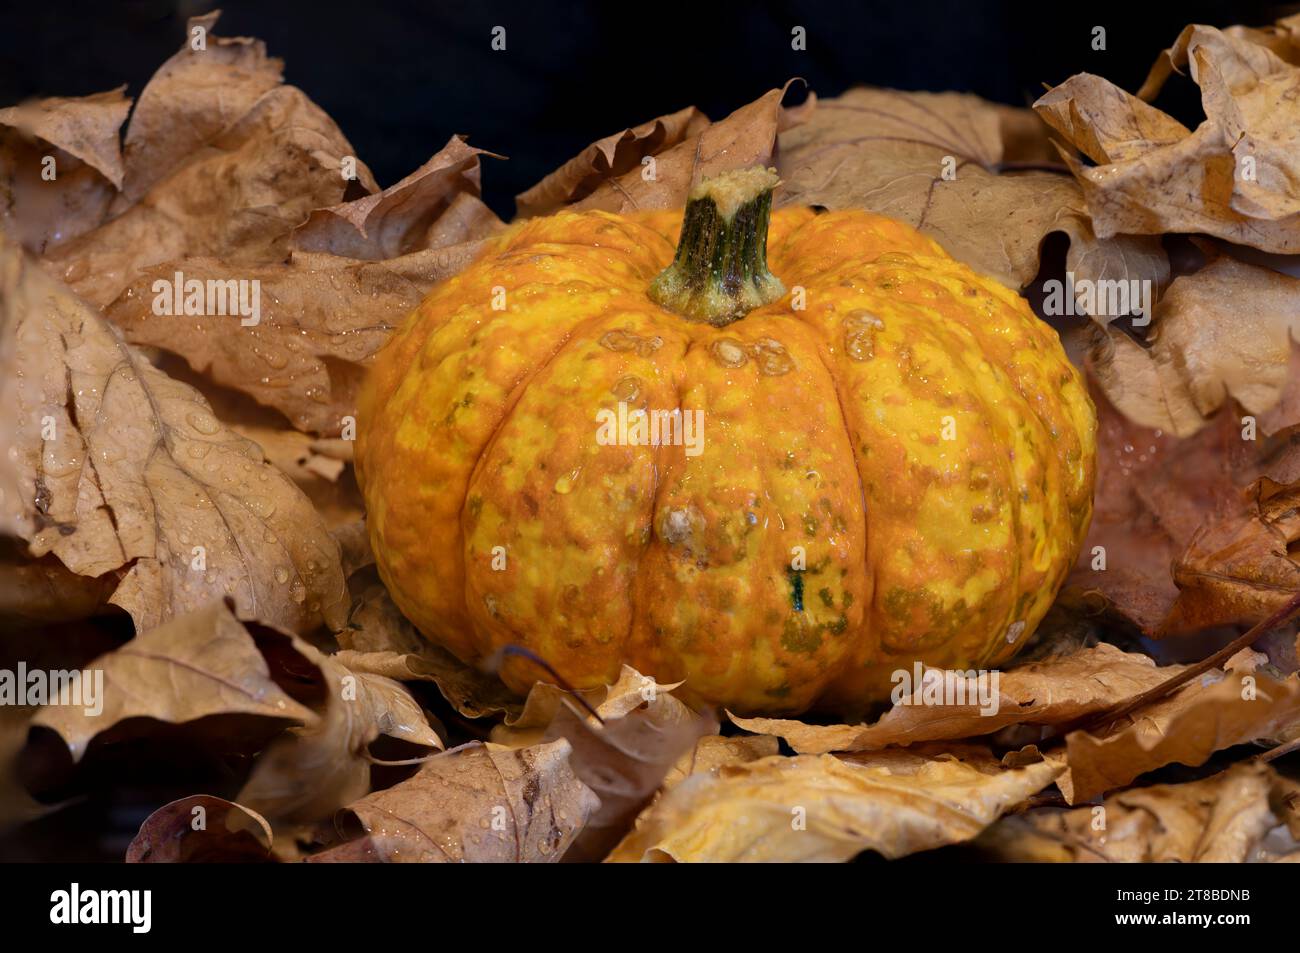 A close up of a jack be little pumpkin. This small pumpkin is on a bed of brown autumnal leaves complete with water droplets Stock Photo